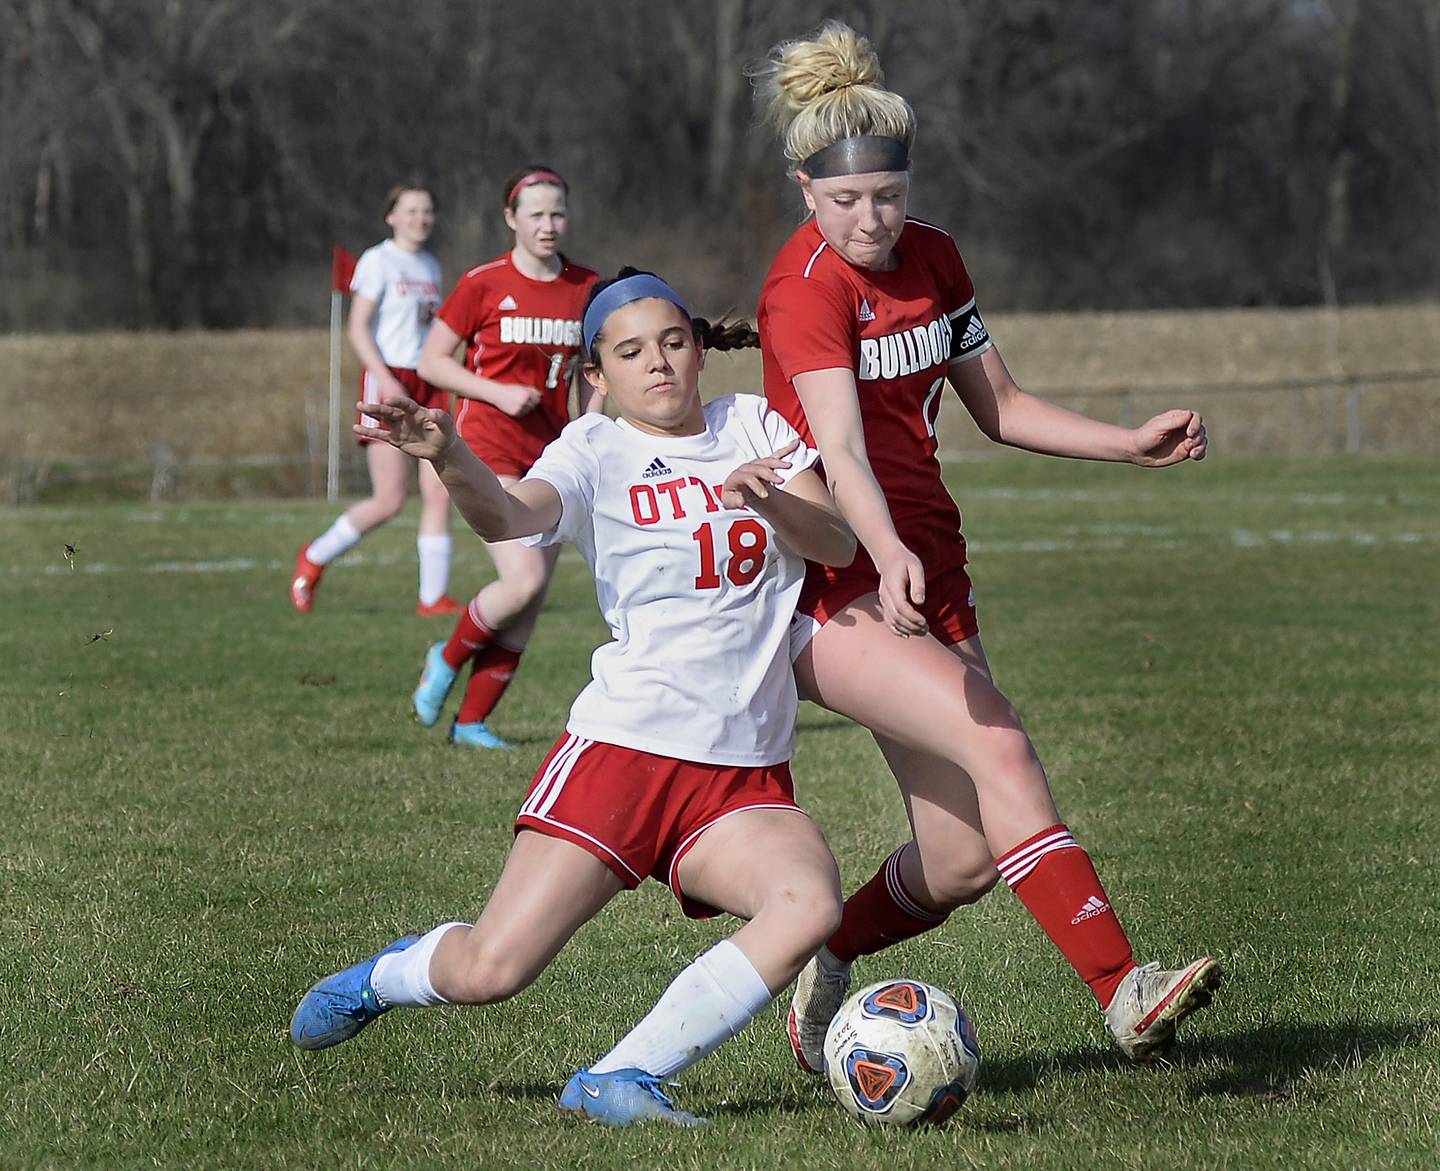 Ottawa’s Gabby Krueger (18 in white) and Streator’s Anna McMullen (18 in red) battle for possession Friday, April 1, 2022, during match at the Streator Family YMCA.